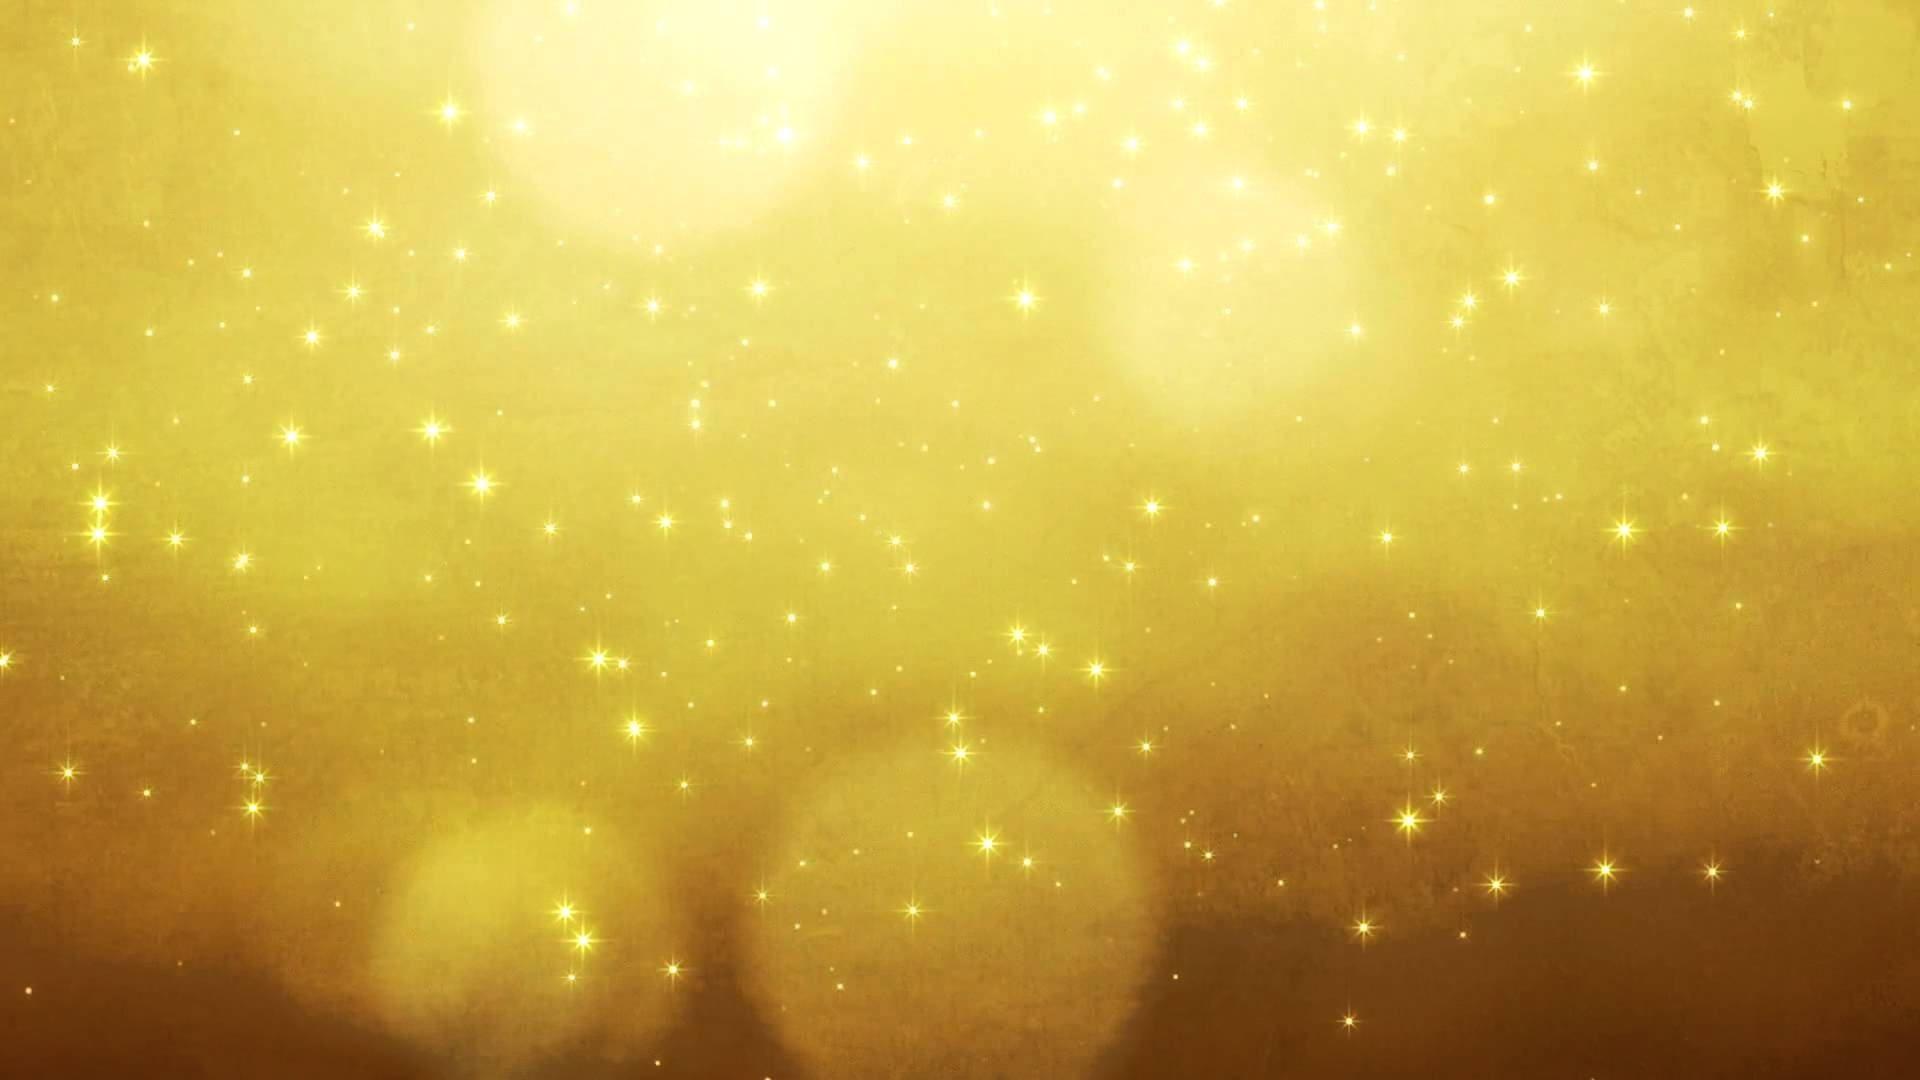 Wallpapers For > Red And Gold Sparkle Backgrounds